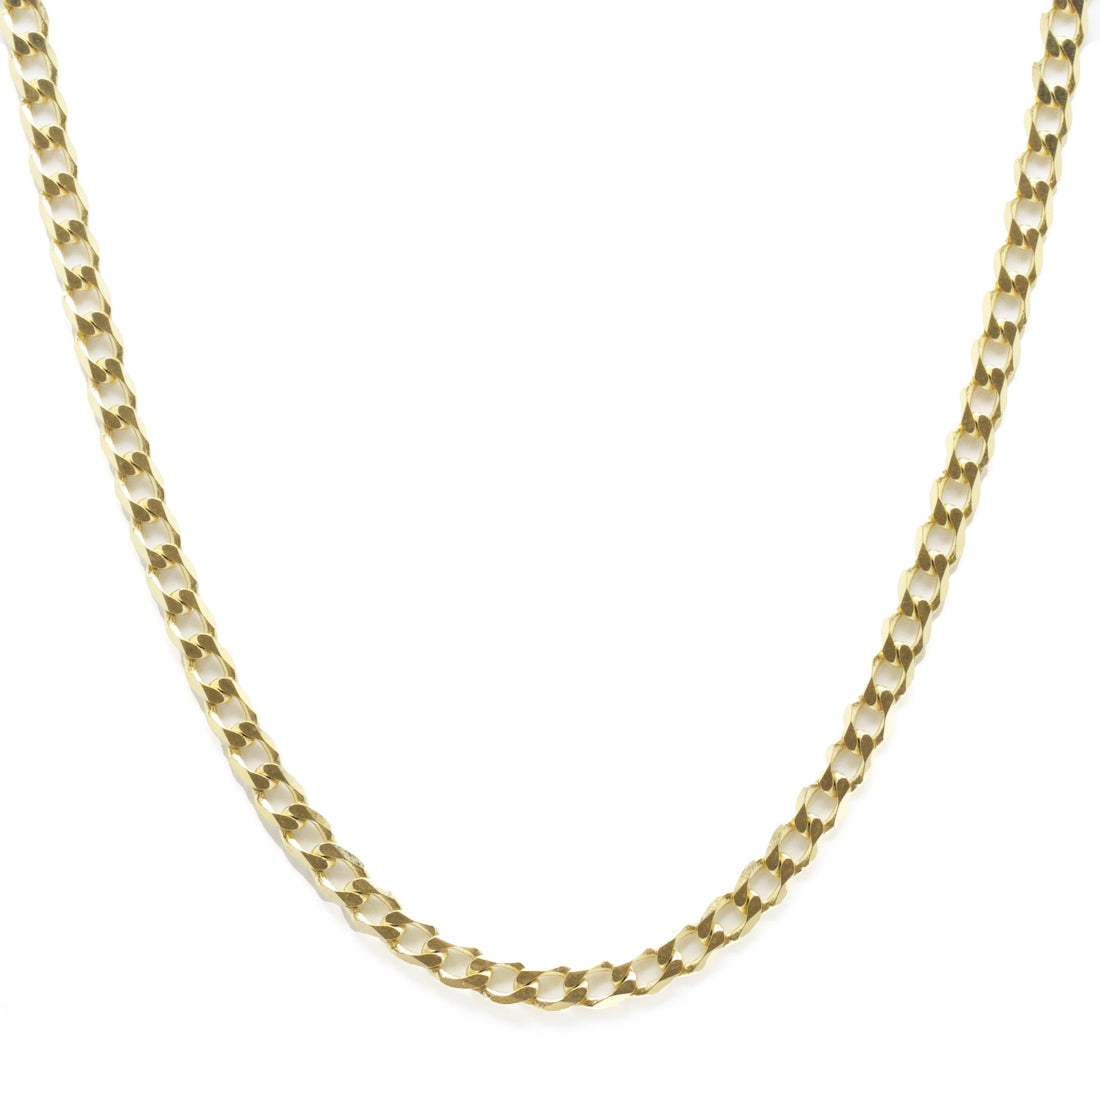 10K Gold Bevelled Curb Chain 20"